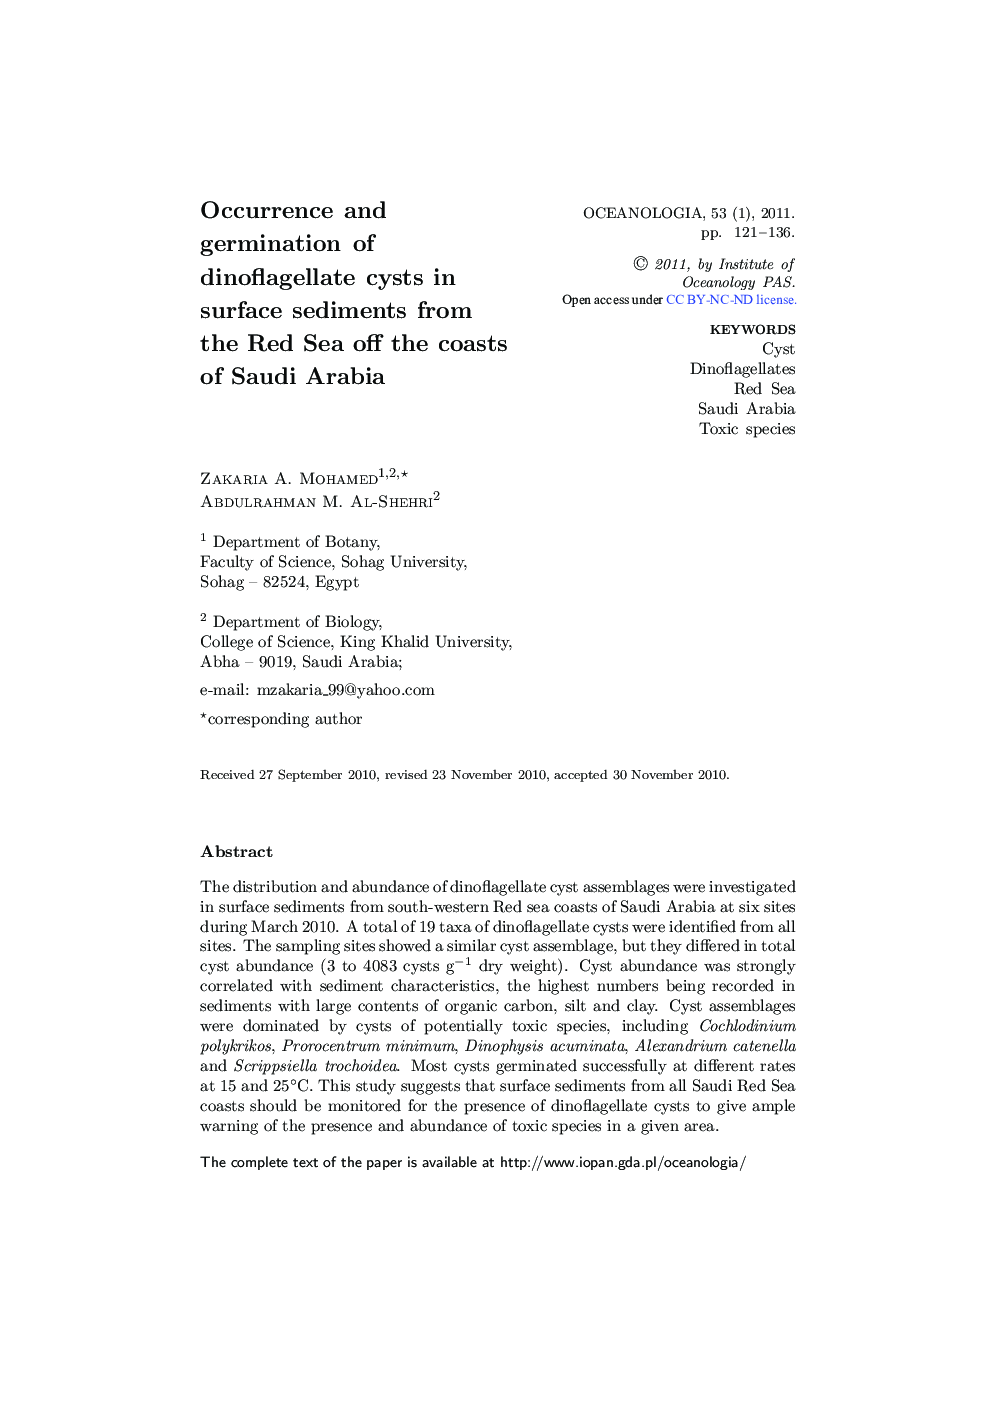 Occurrence and germination of dinoflagellate cysts in surface sediments from the Red Sea off the coasts of Saudi Arabia 